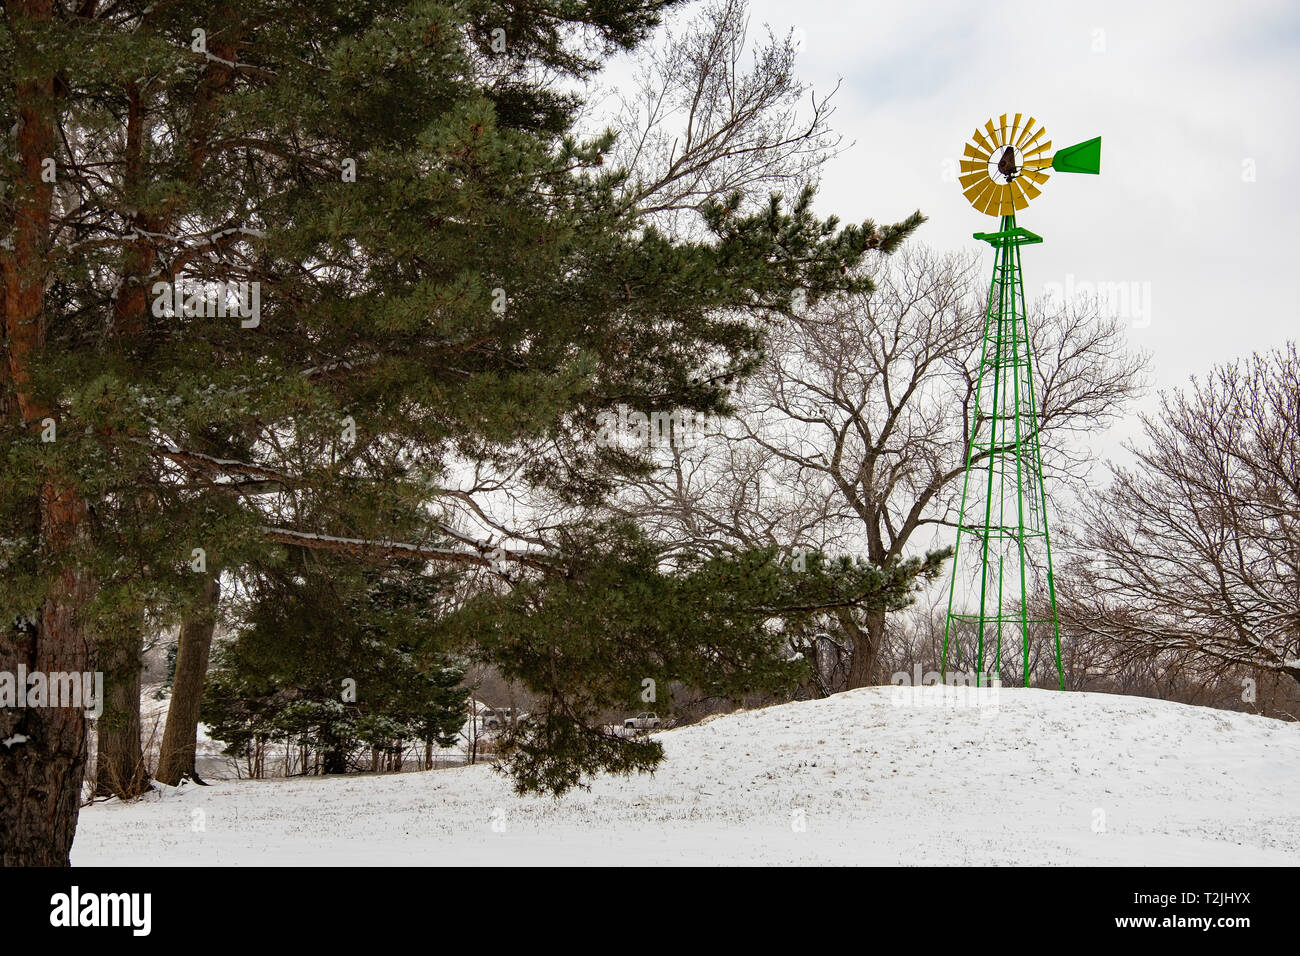 Windmill, painted yellow and green, in Sedgwick county park after a late winter snow. Wichita, Kansas, USA Stock Photo